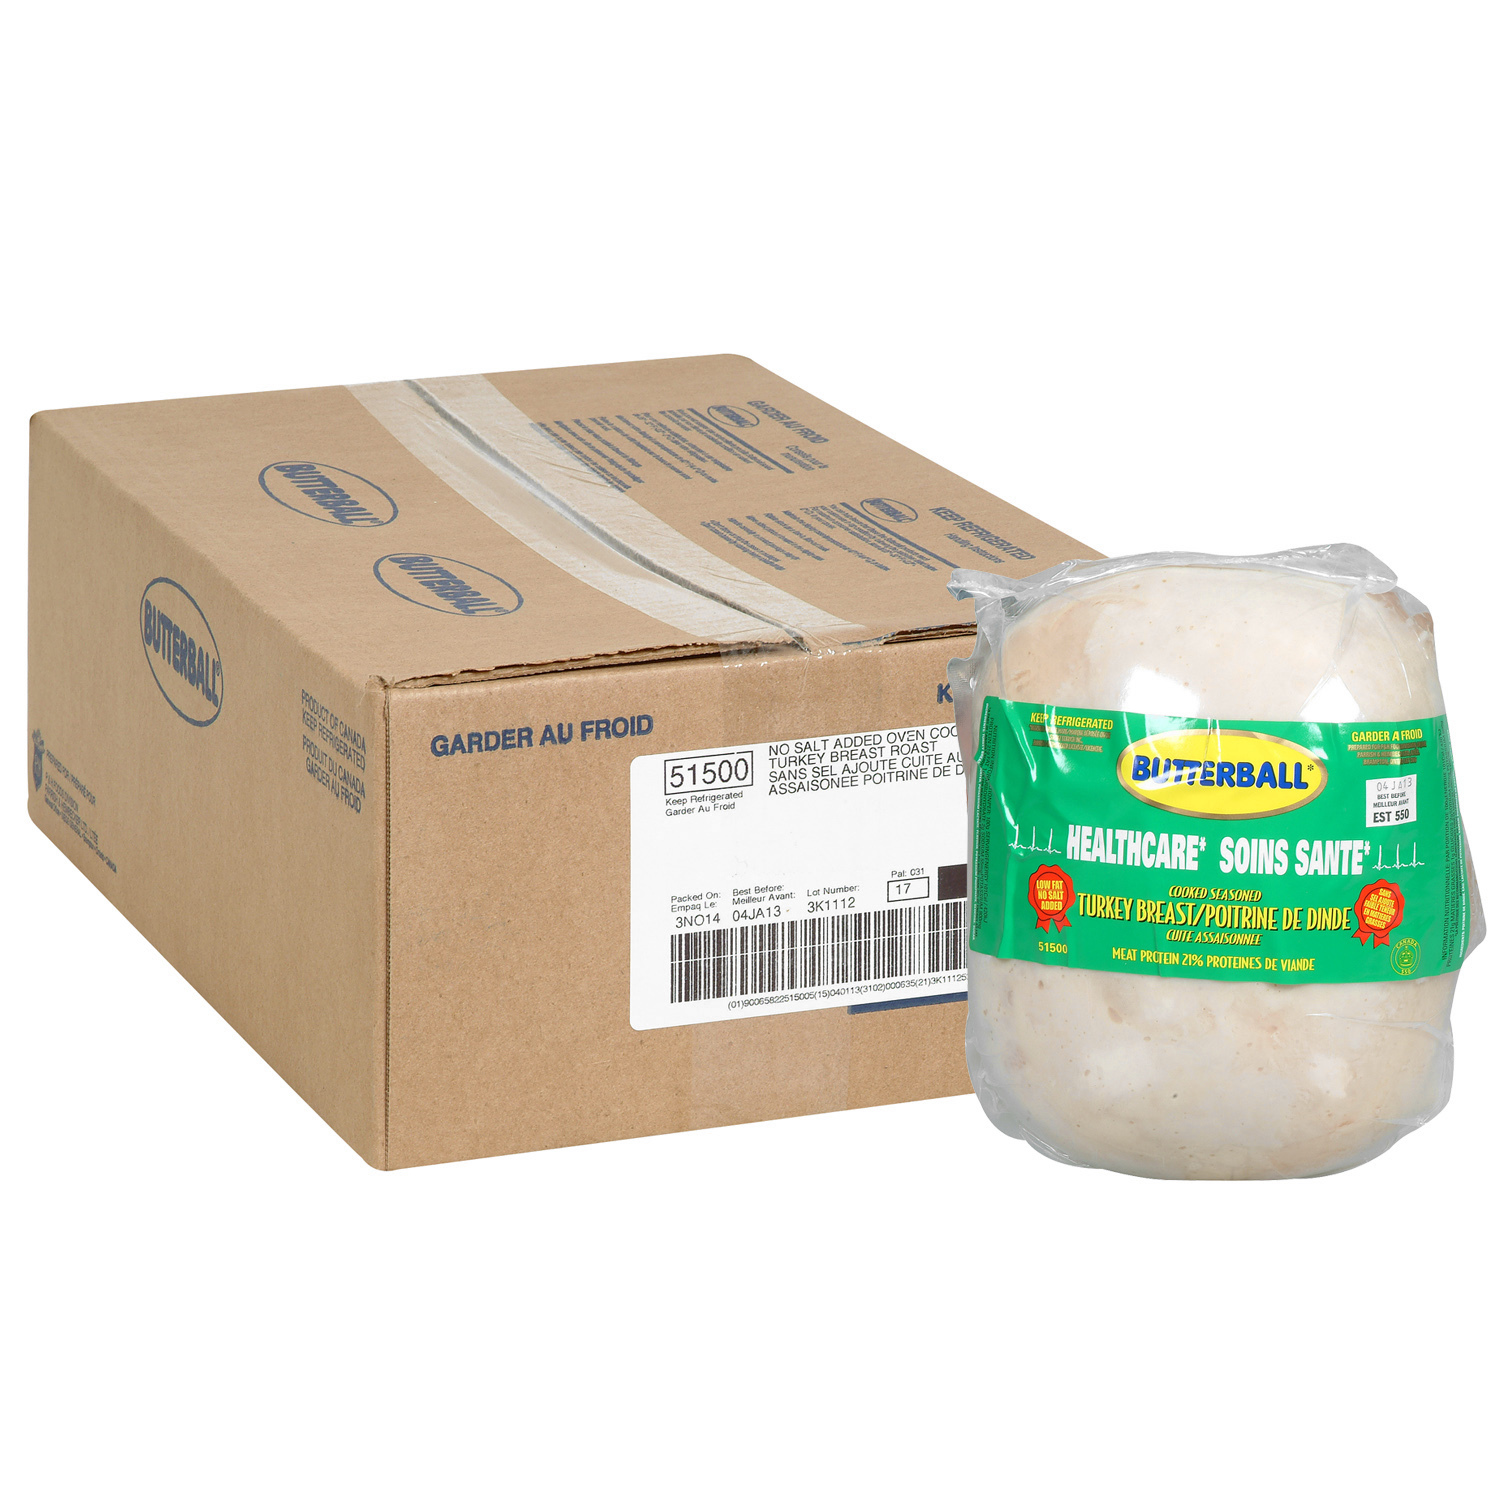 Packaged Turkey Breast and box